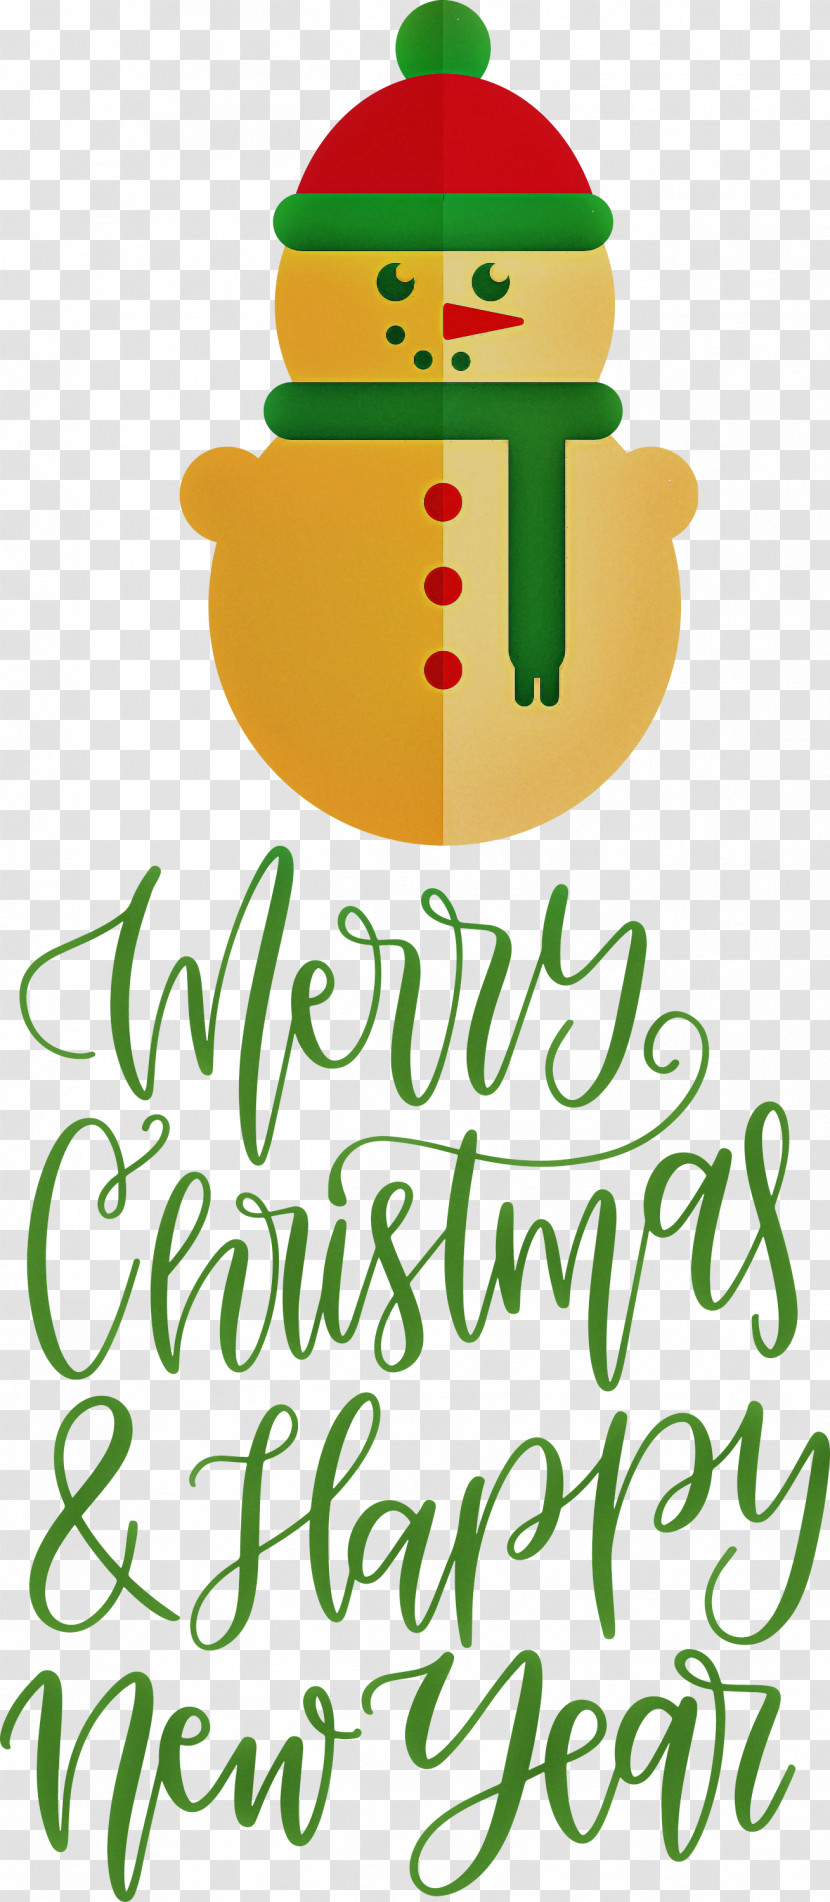 Merry Christmas Happy New Year Transparent PNG